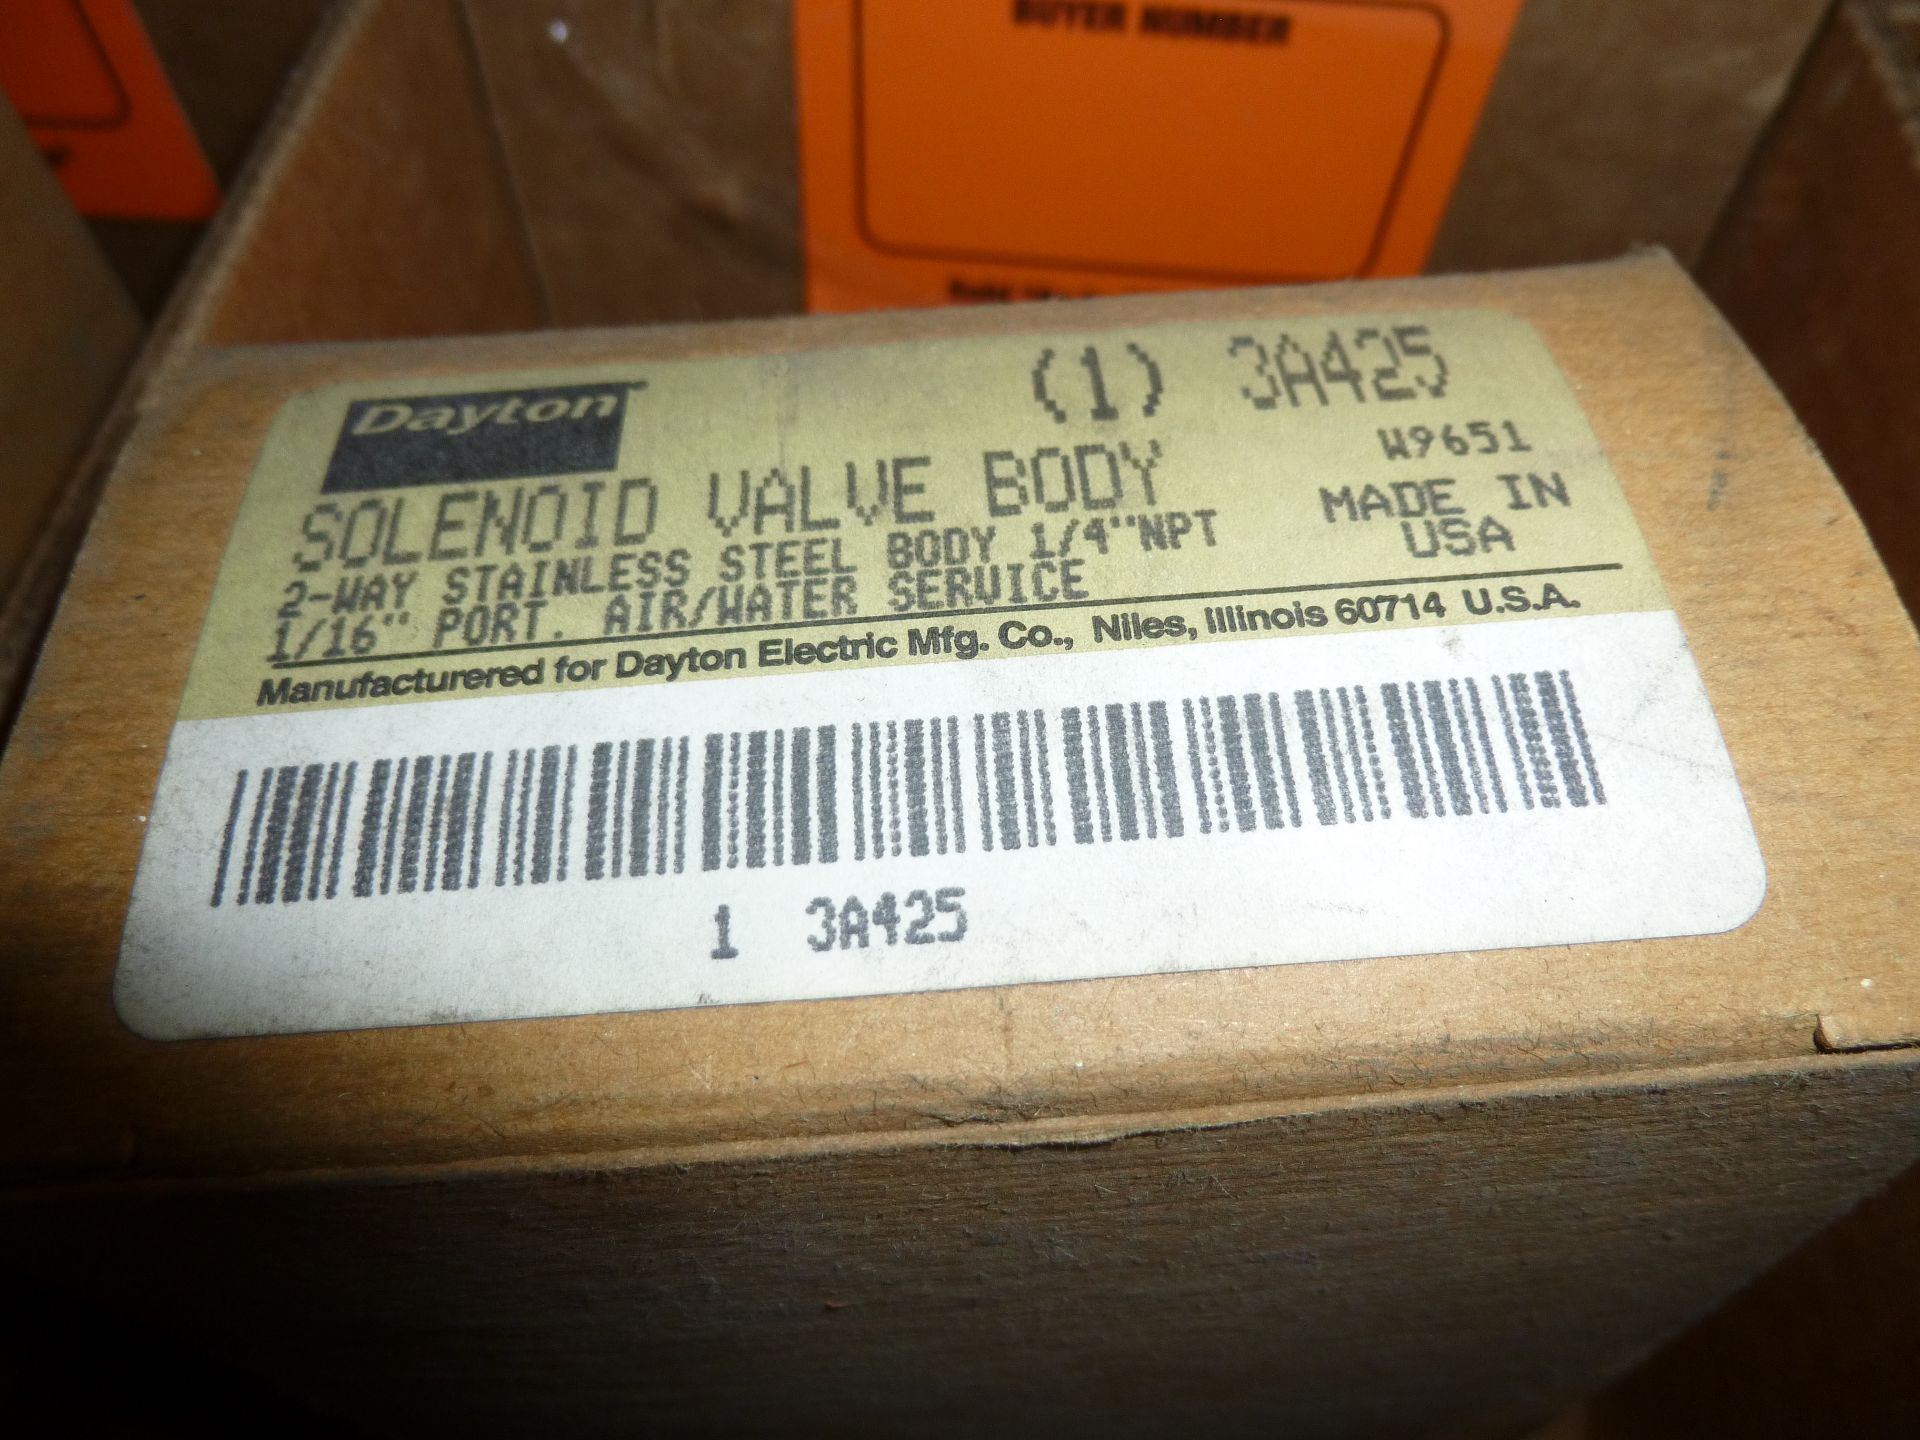 Qty 3 Dayton Solenoid valve body model 3A425, new in boxes, as always with Brolyn LLC auctions, - Image 2 of 2